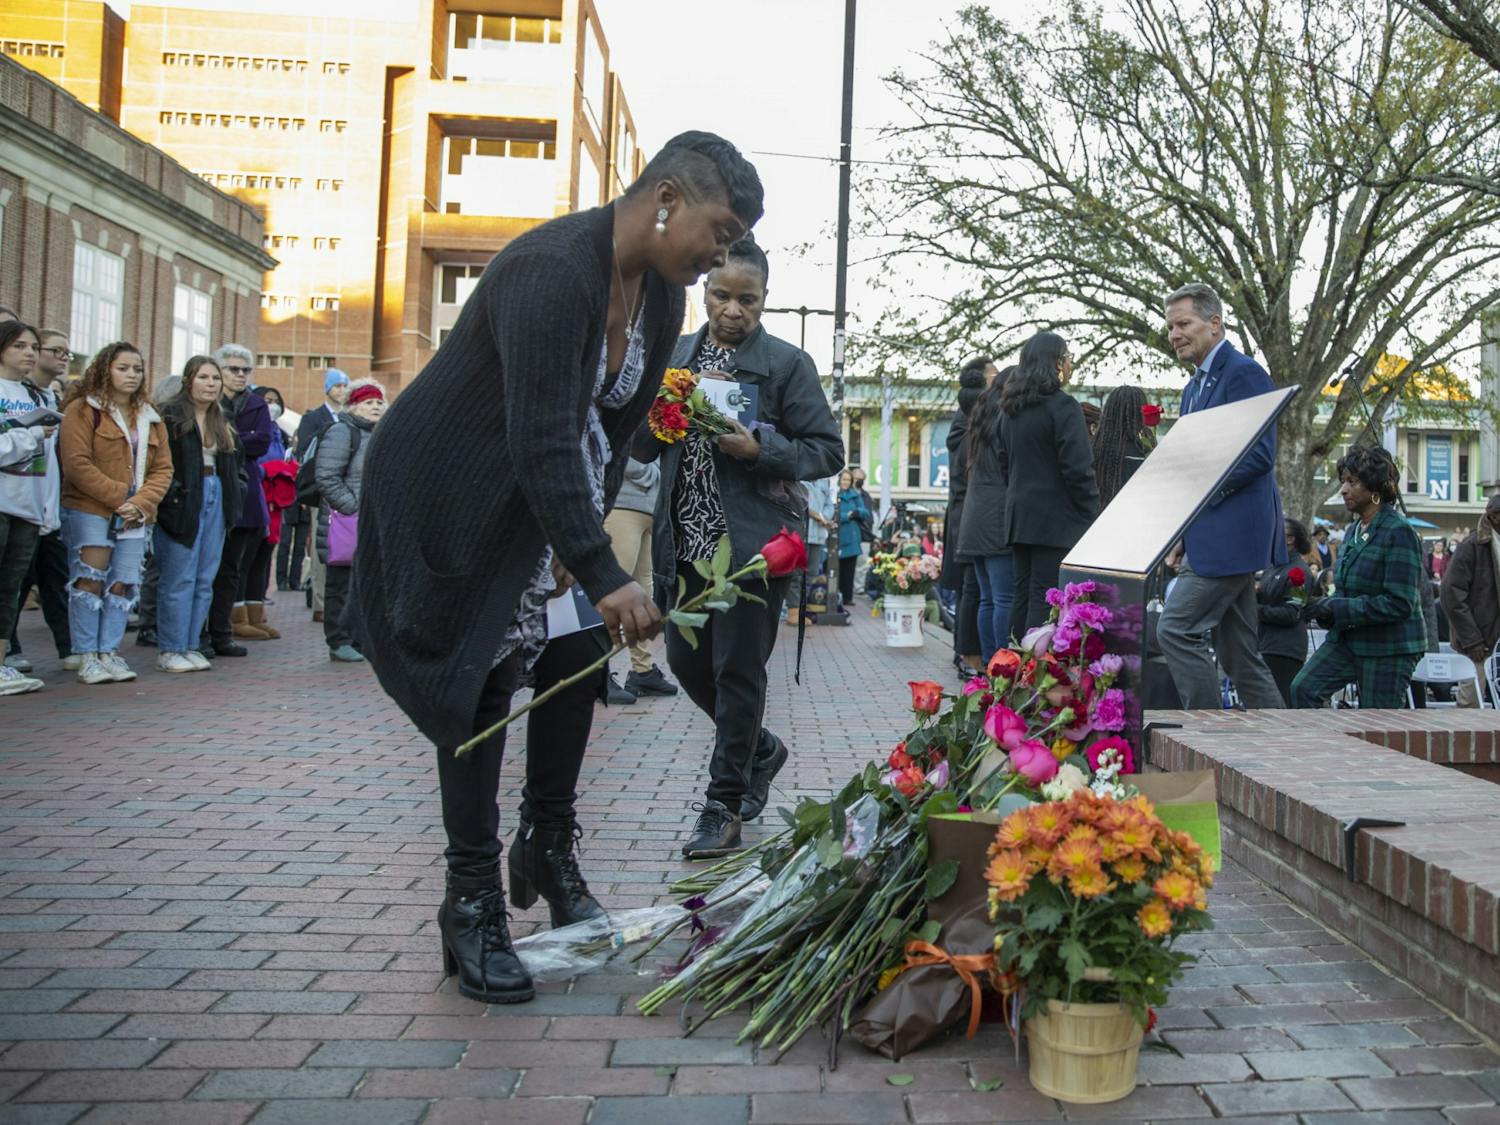 Family members lay flowers at the memorial for James Lewis Cates, Jr. after its dedication on Monday, Nov. 21, 2022.